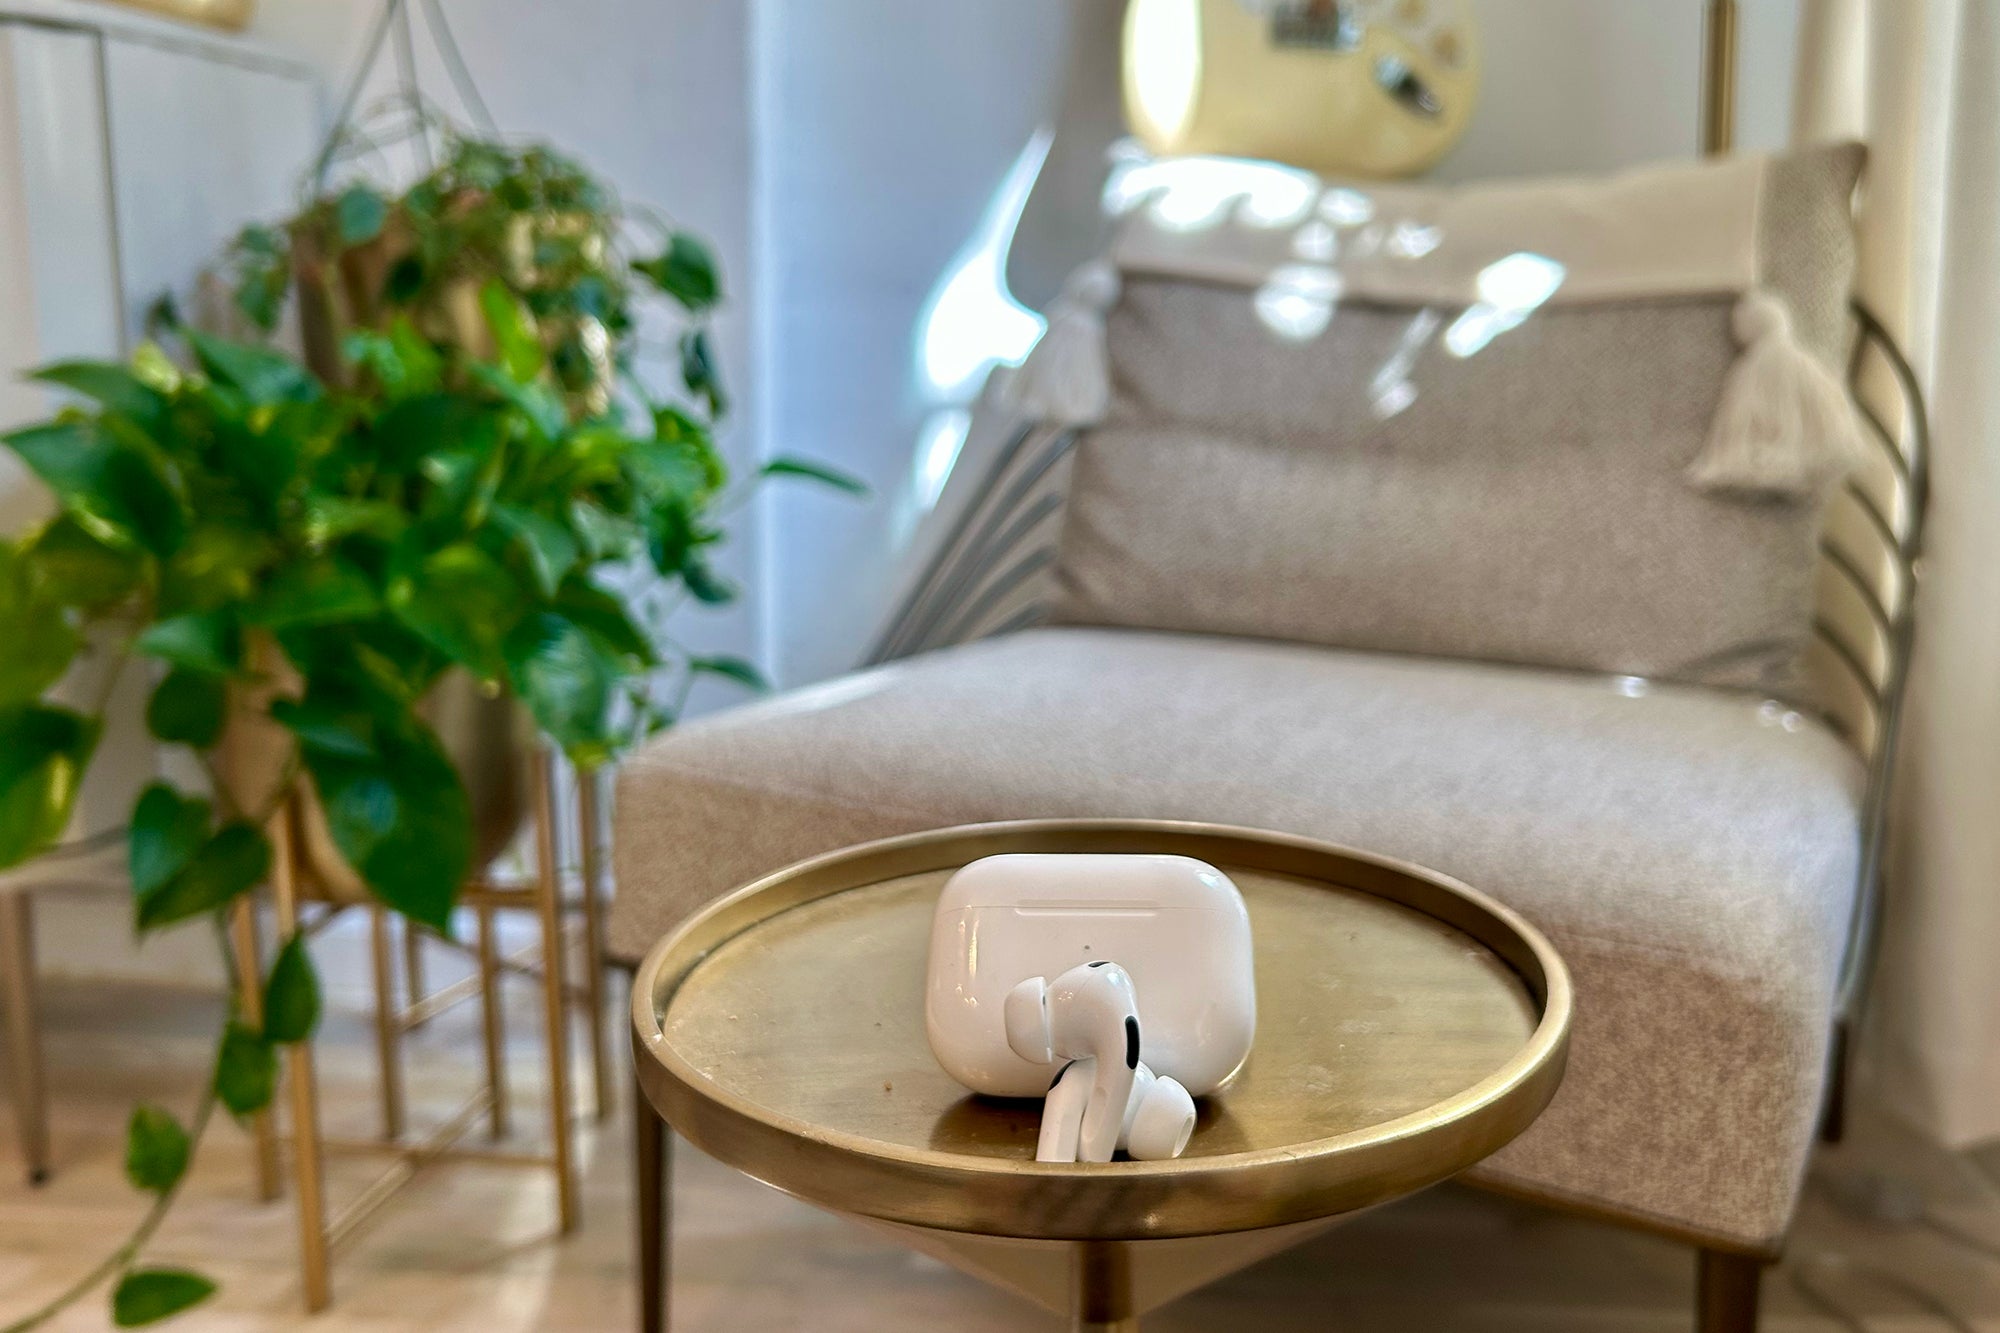 Apple AirPods Pro (2nd generation) on a gold pedestal